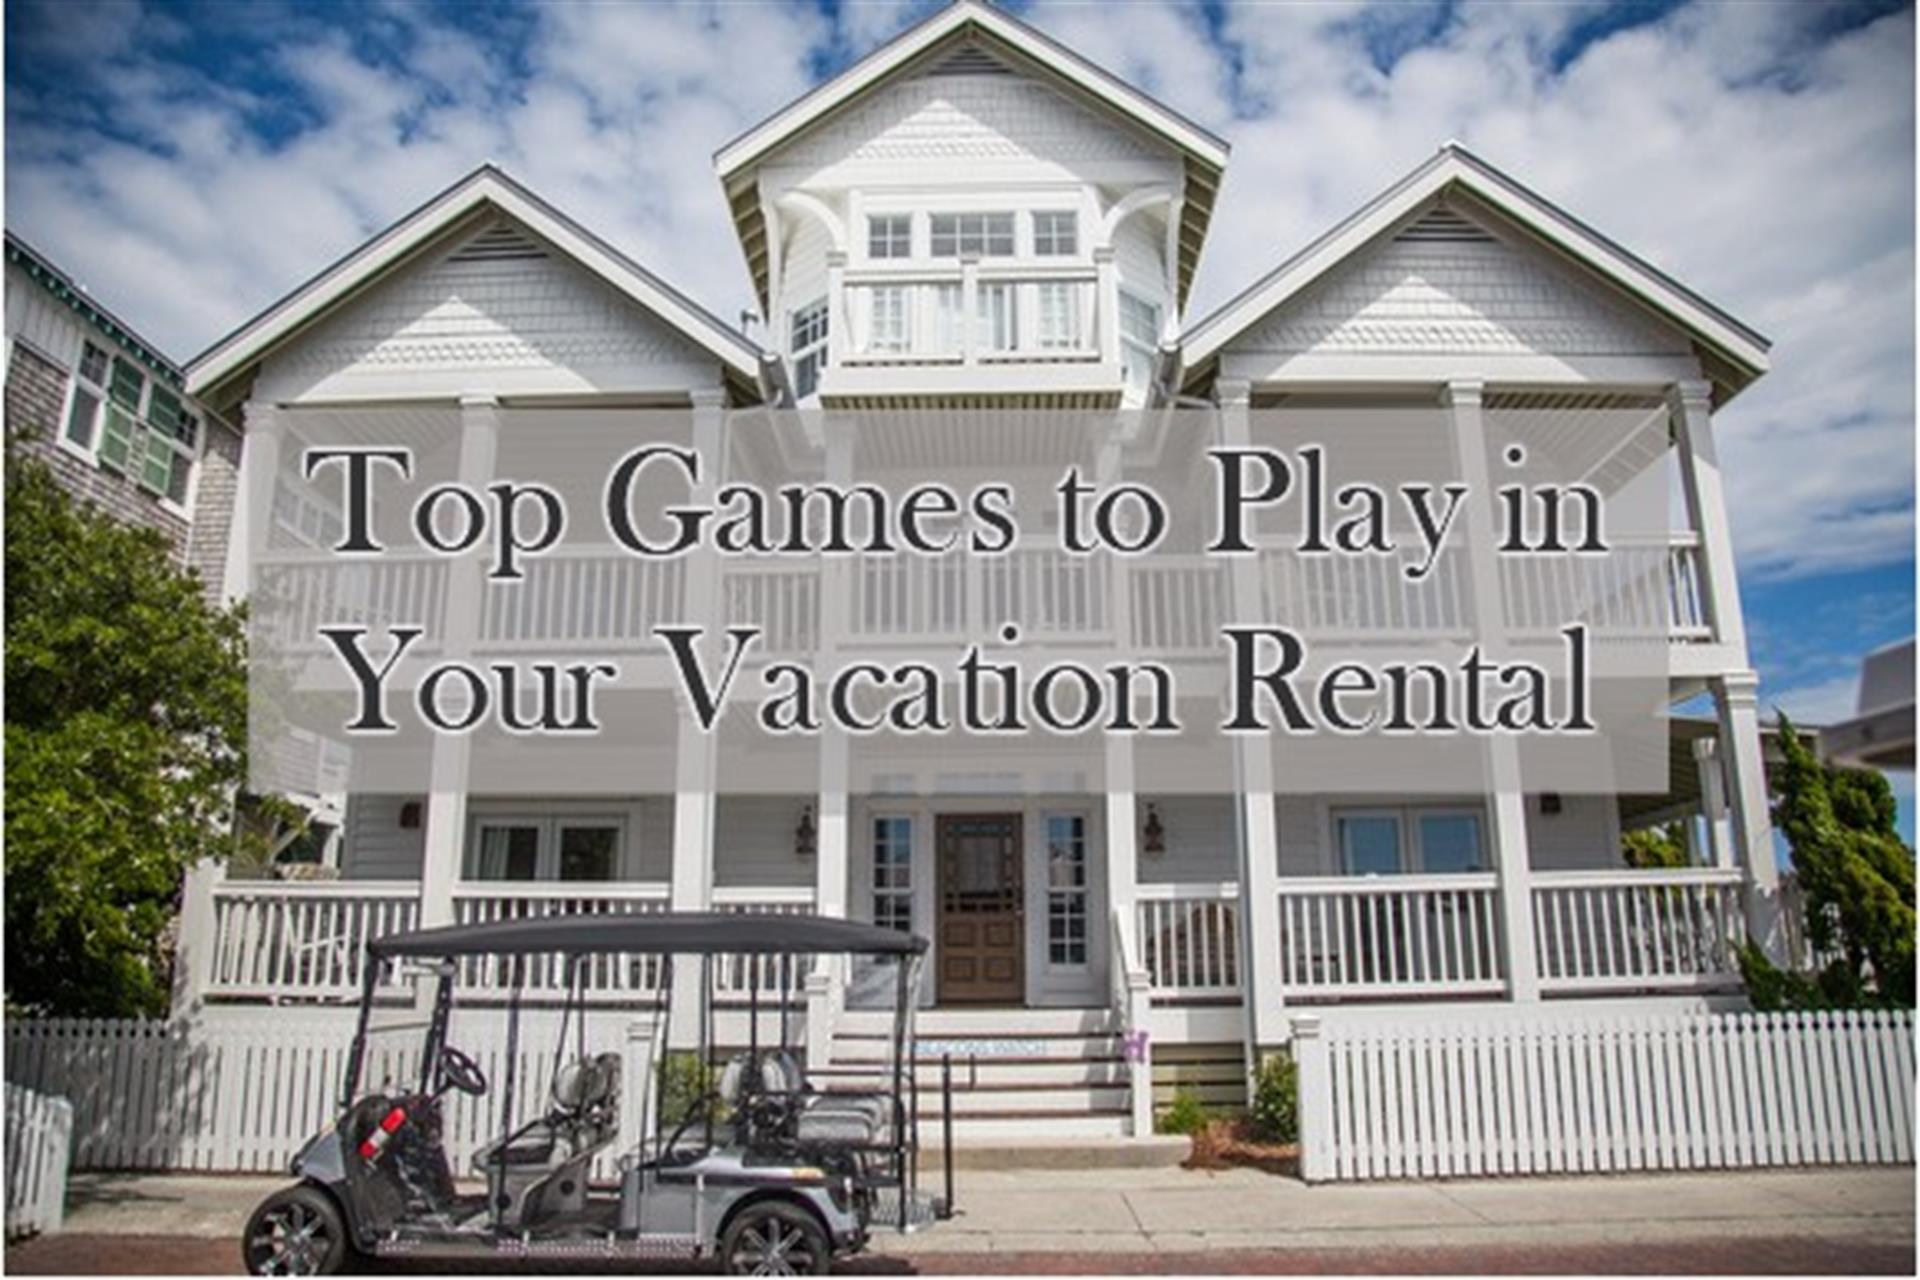 Games to Play in Your Vacation Rental